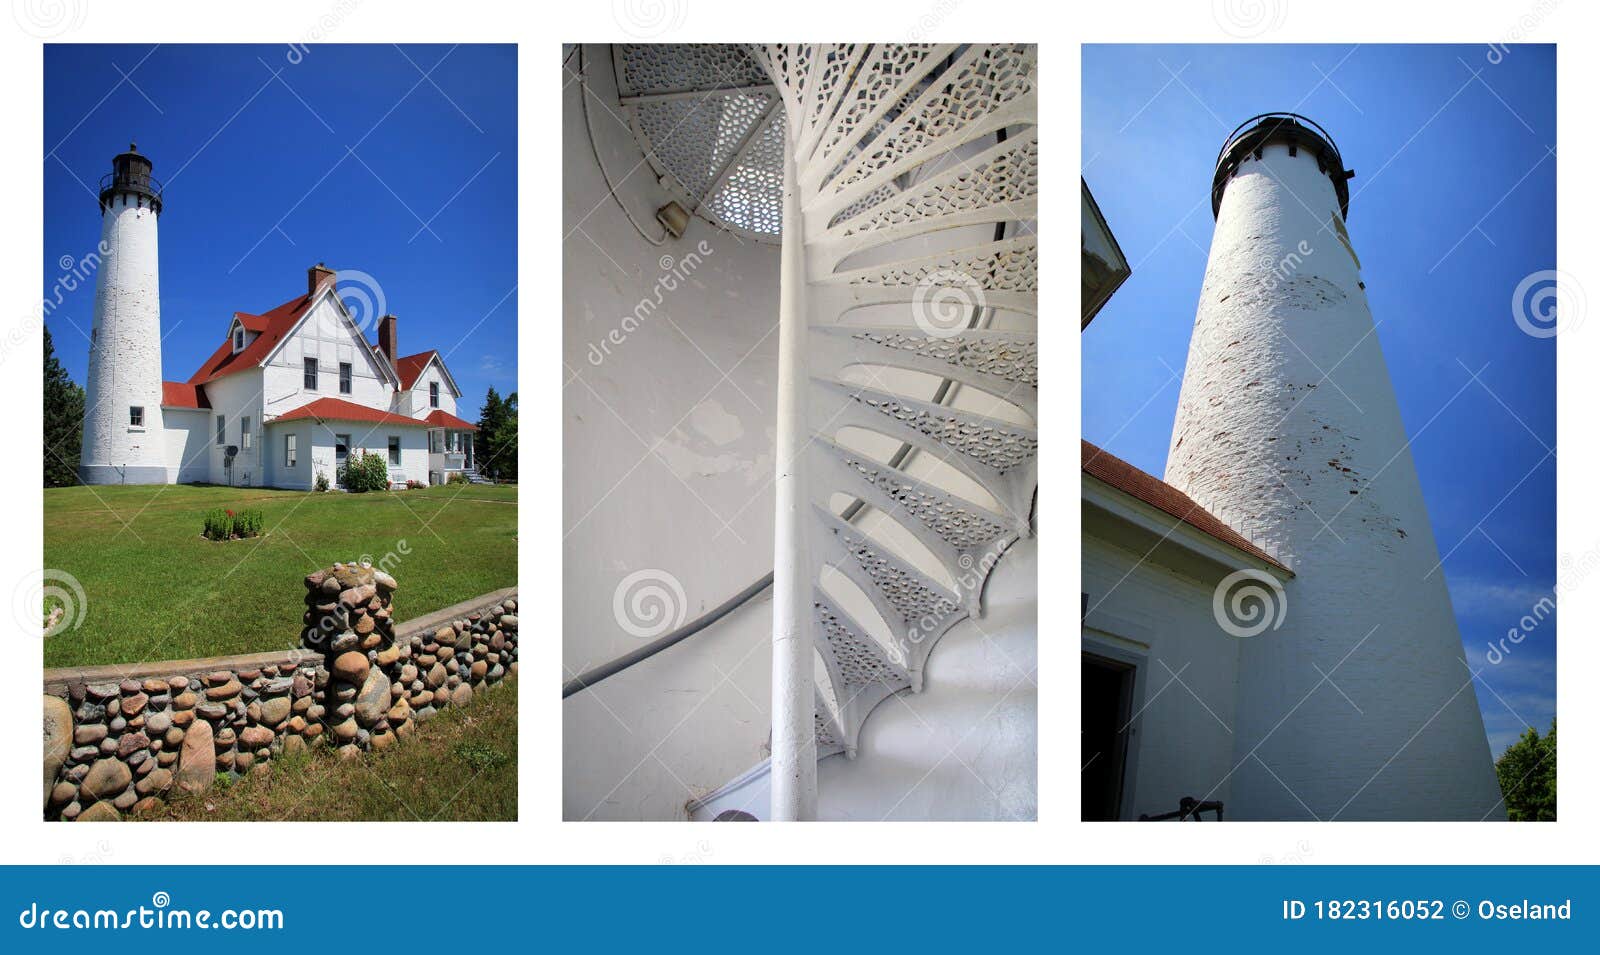 point iroquois lighthouse triptych, michigan